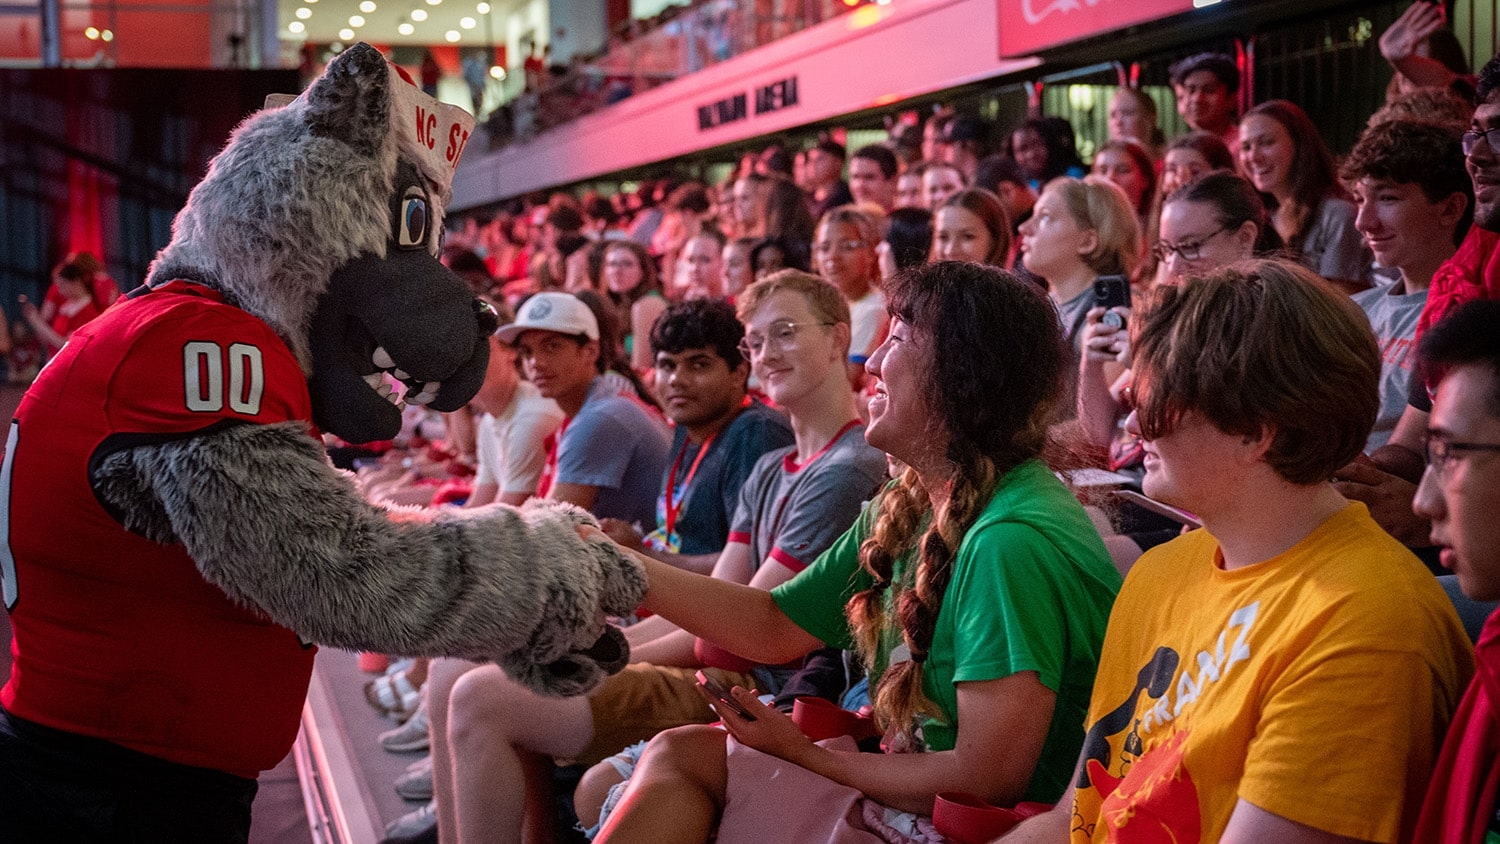 Mr. Wuf shakes hands with a new NC State student during Convocation in Reynolds Coliseum.